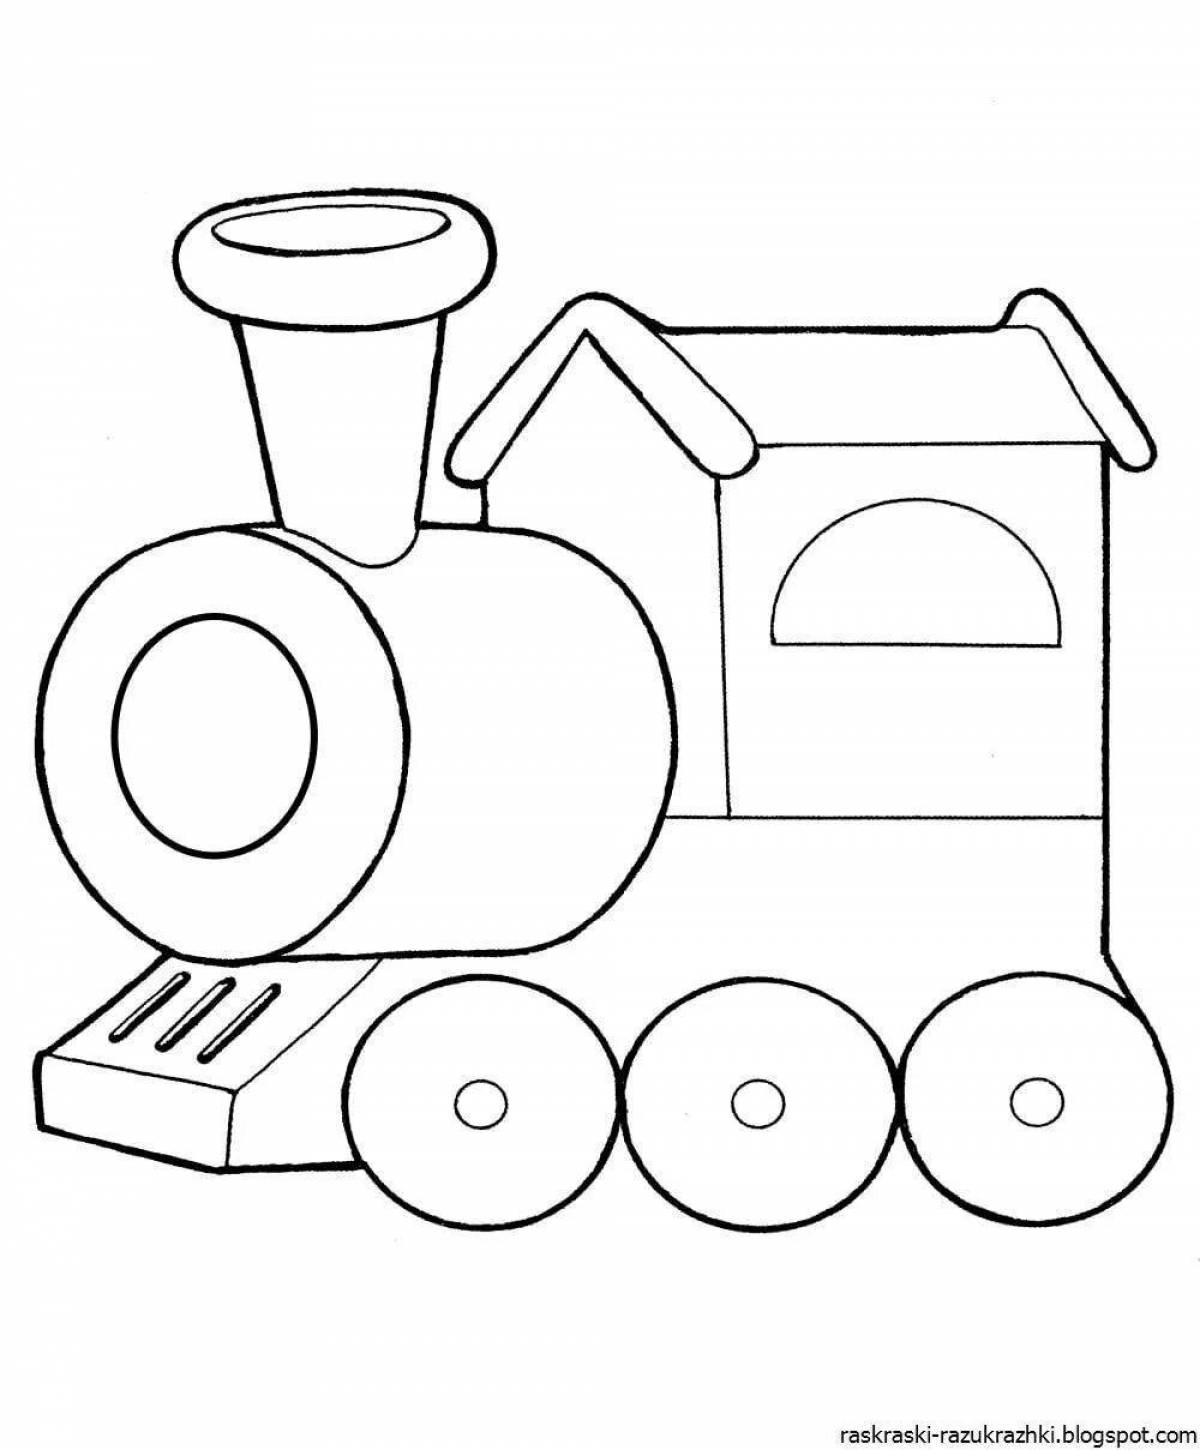 Coloring train with paints for preschoolers